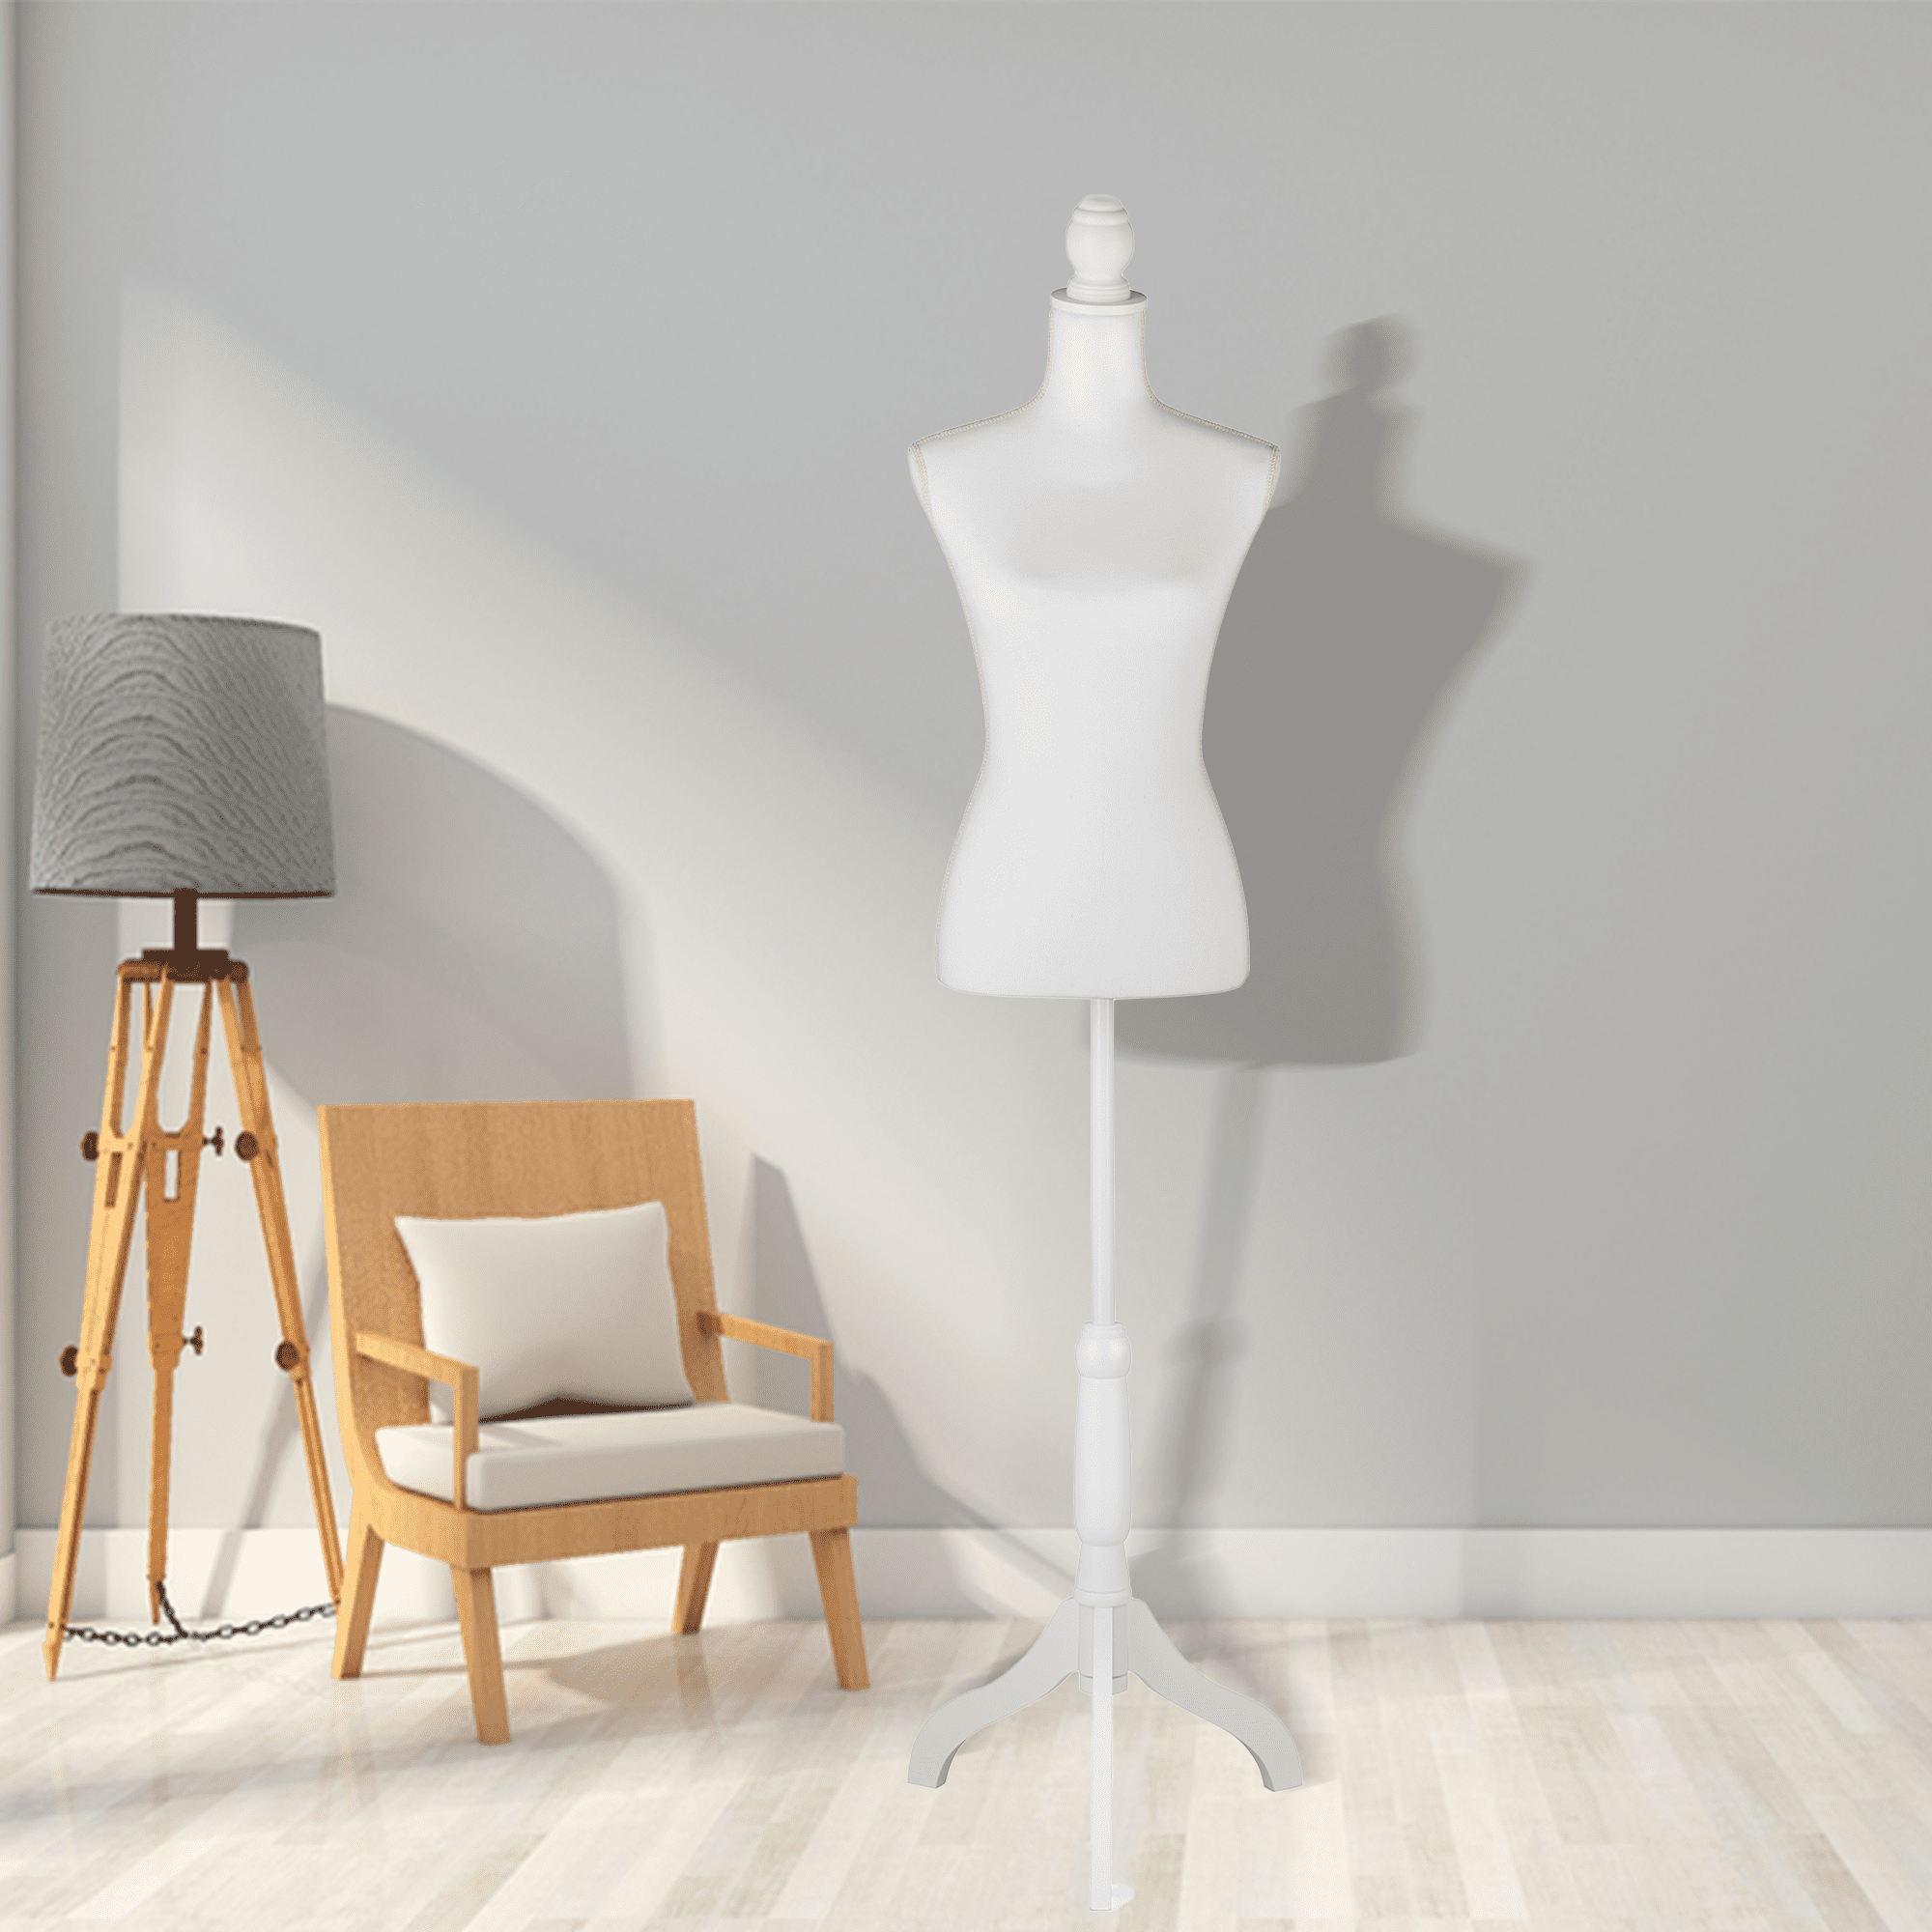 Mannequin, 49.6-63.4 Inch Adjustable Mannequins Body Female, Solid Wood Dress  Mannequin with Stand, Sewing Mannequin Female, Adjustable Dress Form for  Clothing Jewelry Display, Manikin Body, White - Yahoo Shopping